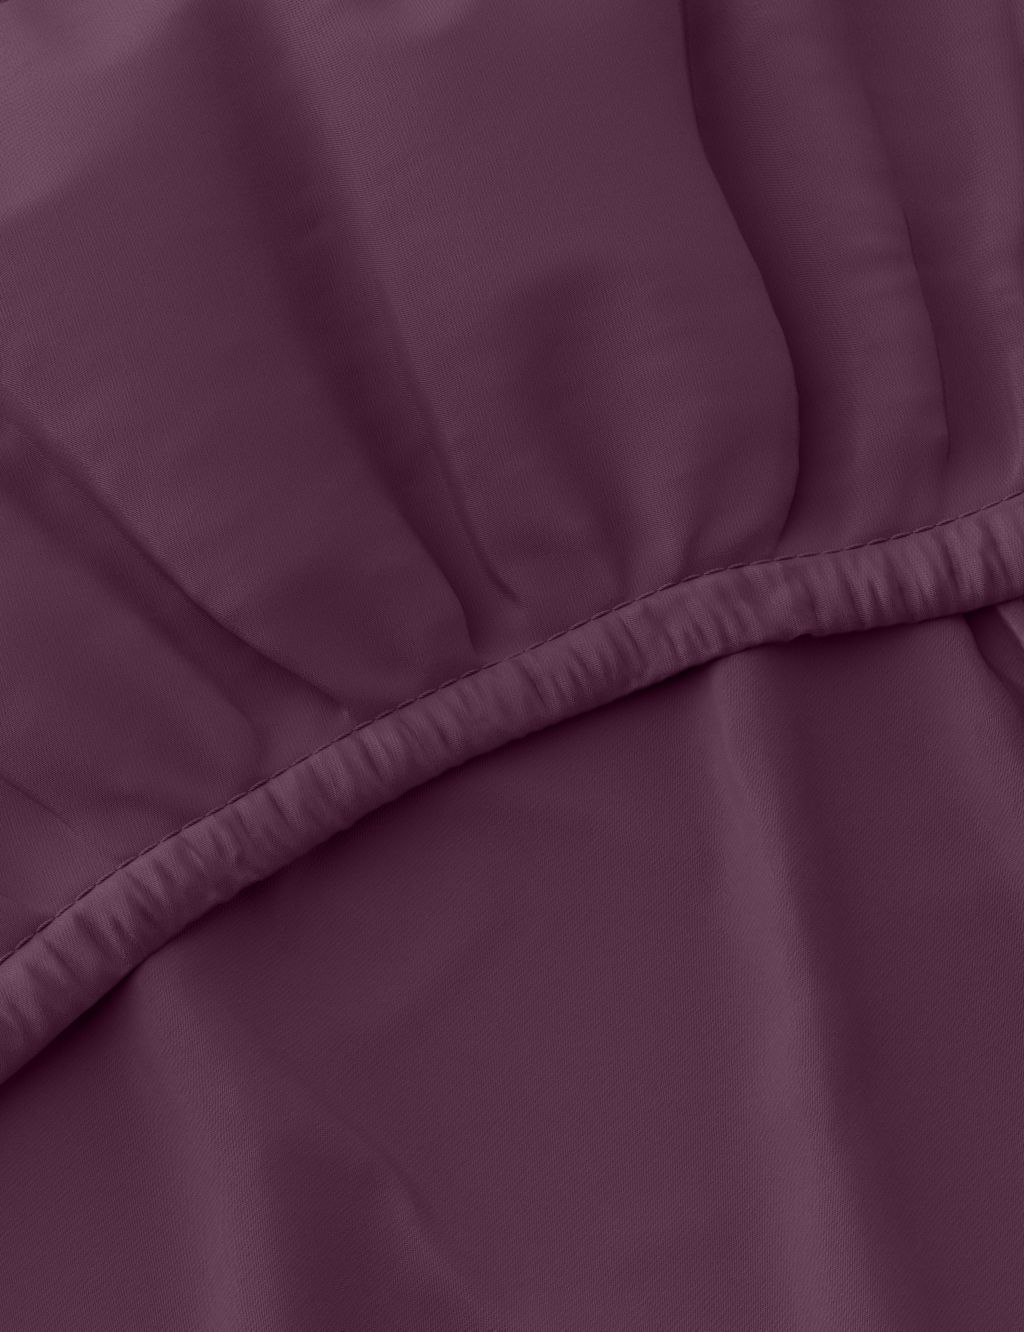 Egyptian Cotton 230 Thread Count Fitted Sheet image 4